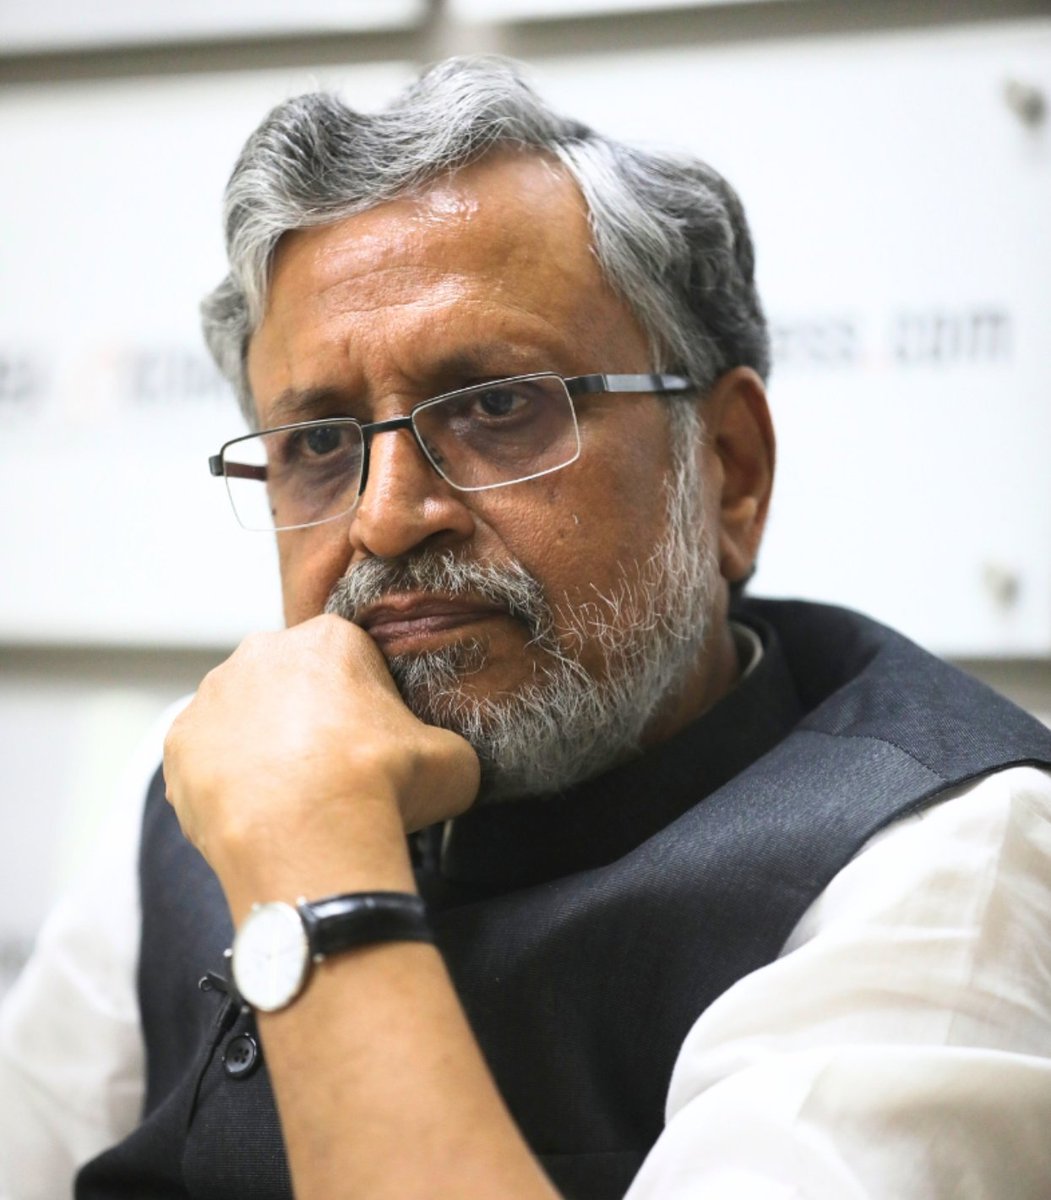 Really sad to hear about the untimely passing of Shri #SushilModi ji. A wonderful man & one of Bihar's stalwart leaders, his relentless fight against corruption will always be remembered. May his soul rest in peace... Om Shanti!